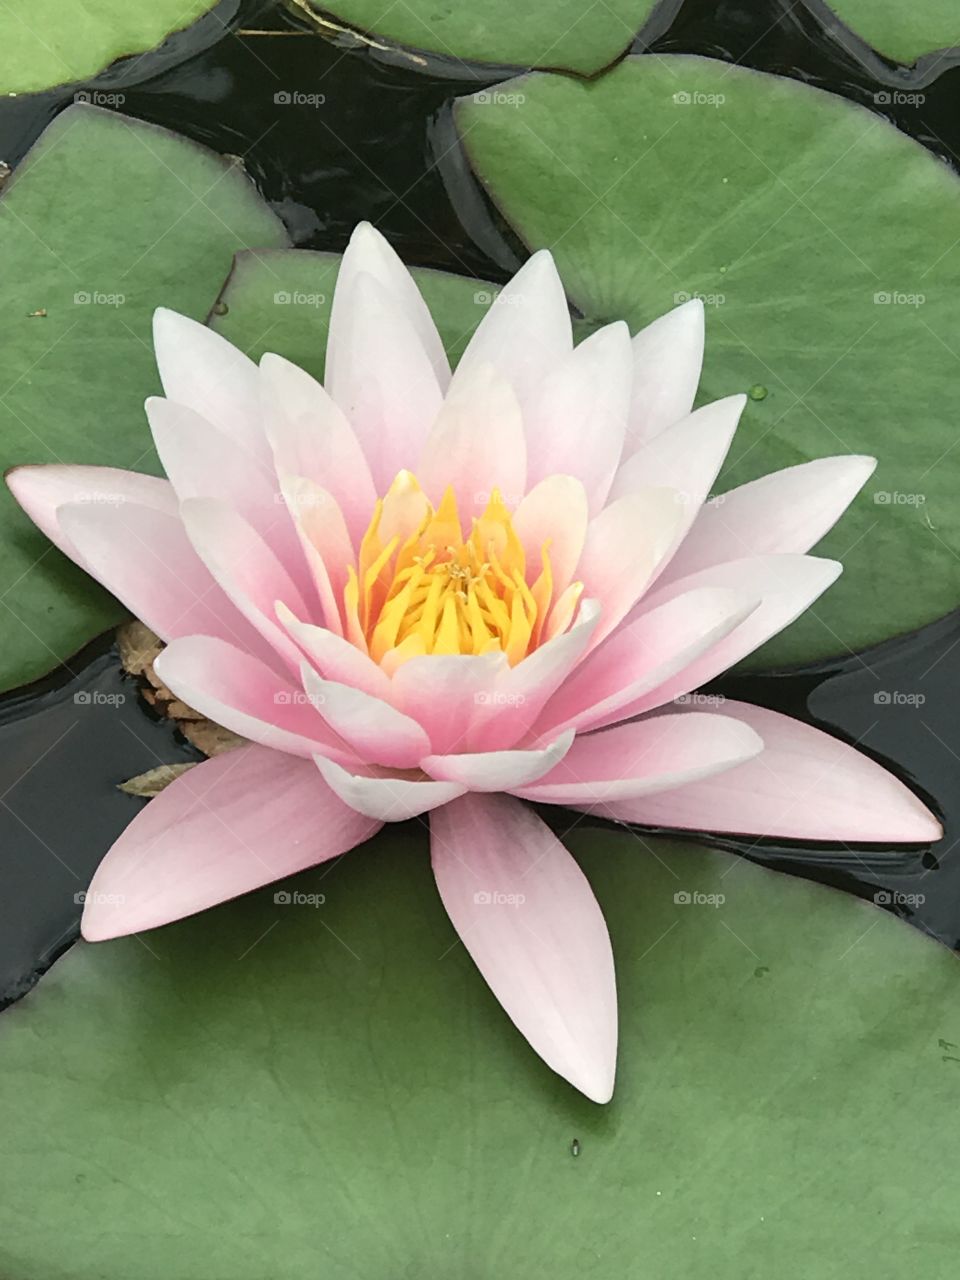 In the late Summer sun, this Lotus blooms on the waters in the ponds of one of Europe’s oldest Botanical Gardens in Florence Italy 